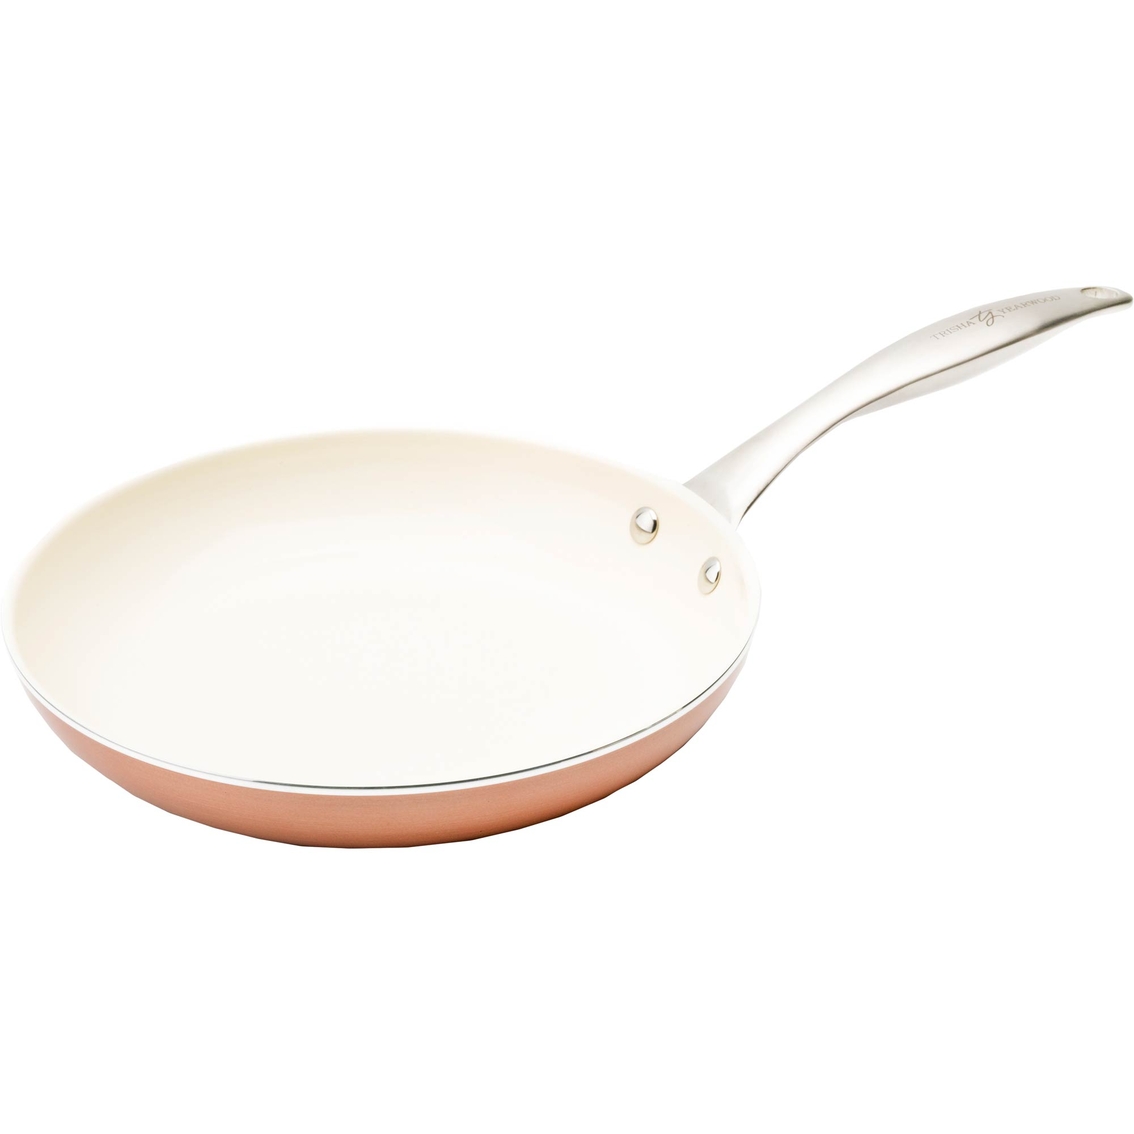 Trisha Yearwood City Chic Copper 10 In. Open Frypan, Atg Archive